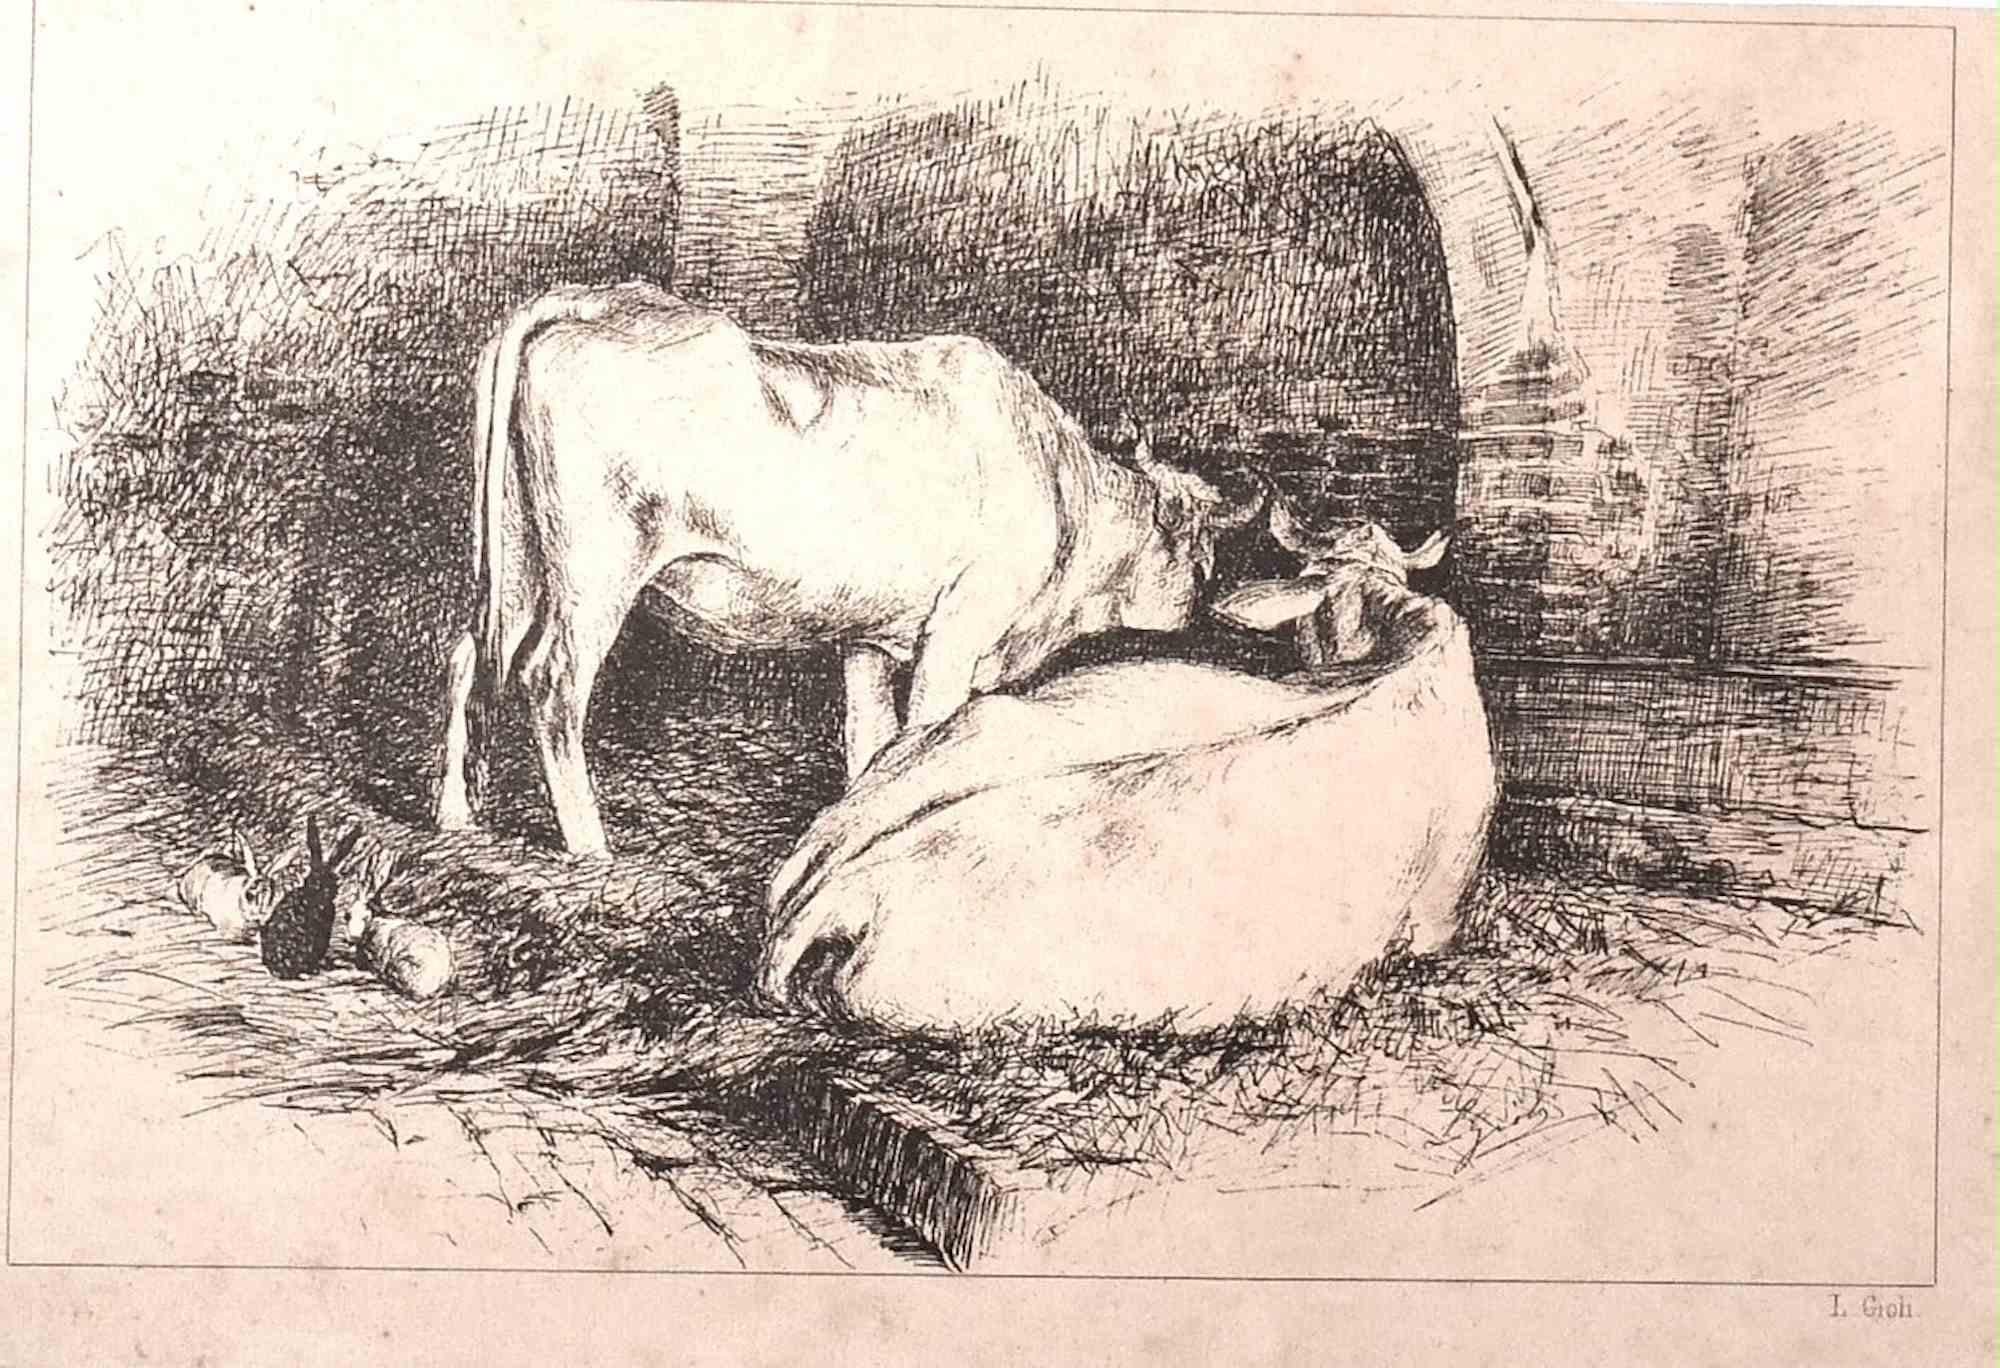 In the Stable is an original Lithograph realized in the 1880 Century by Luigi Gioli.

Good conditions.

The artwork is depicted through perfect hatching in a well-balanced composition.